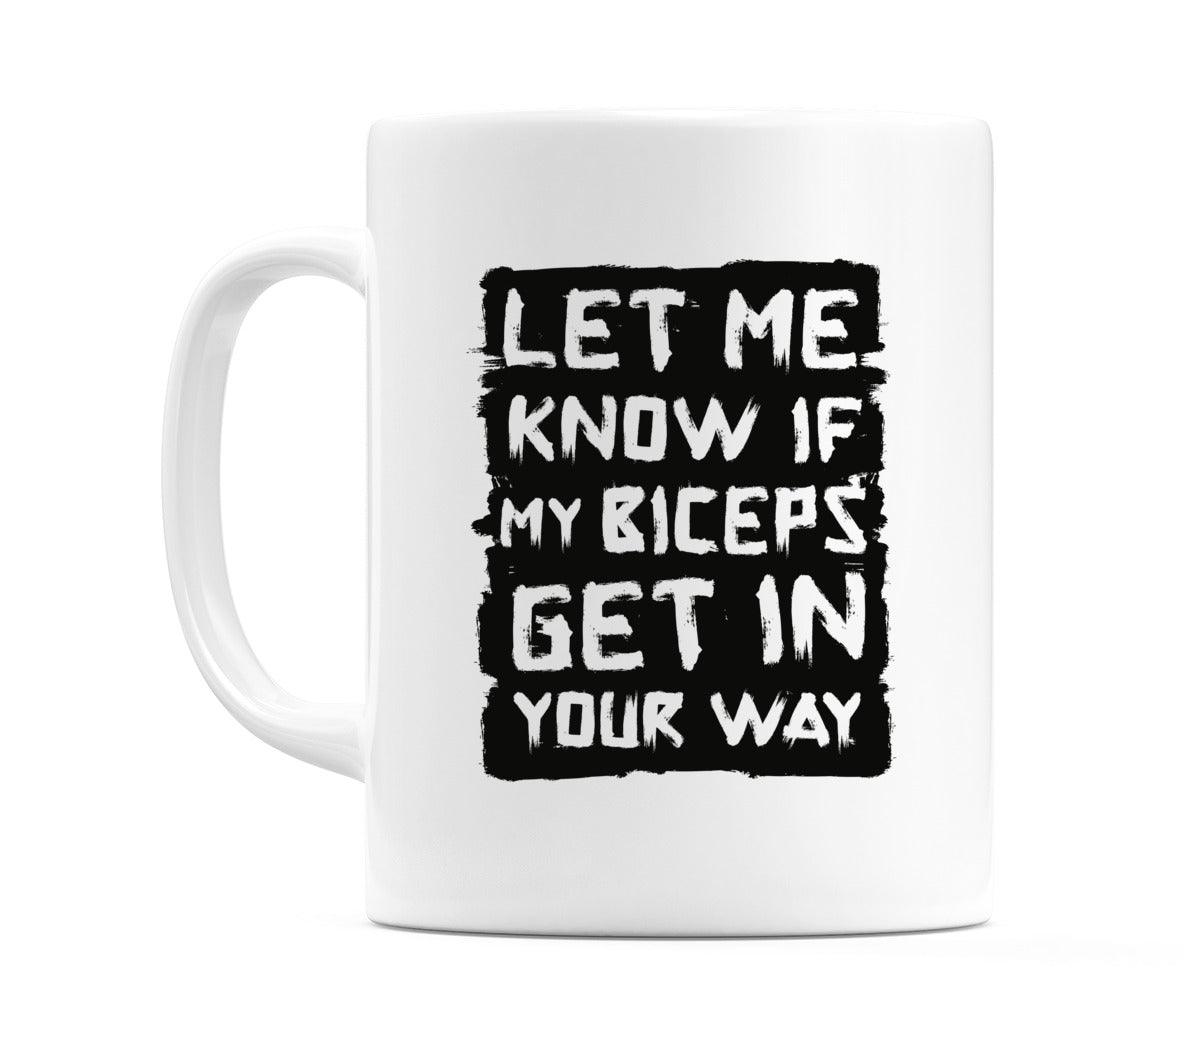 Let Me Know If My Biceps Get In Your Way Mug